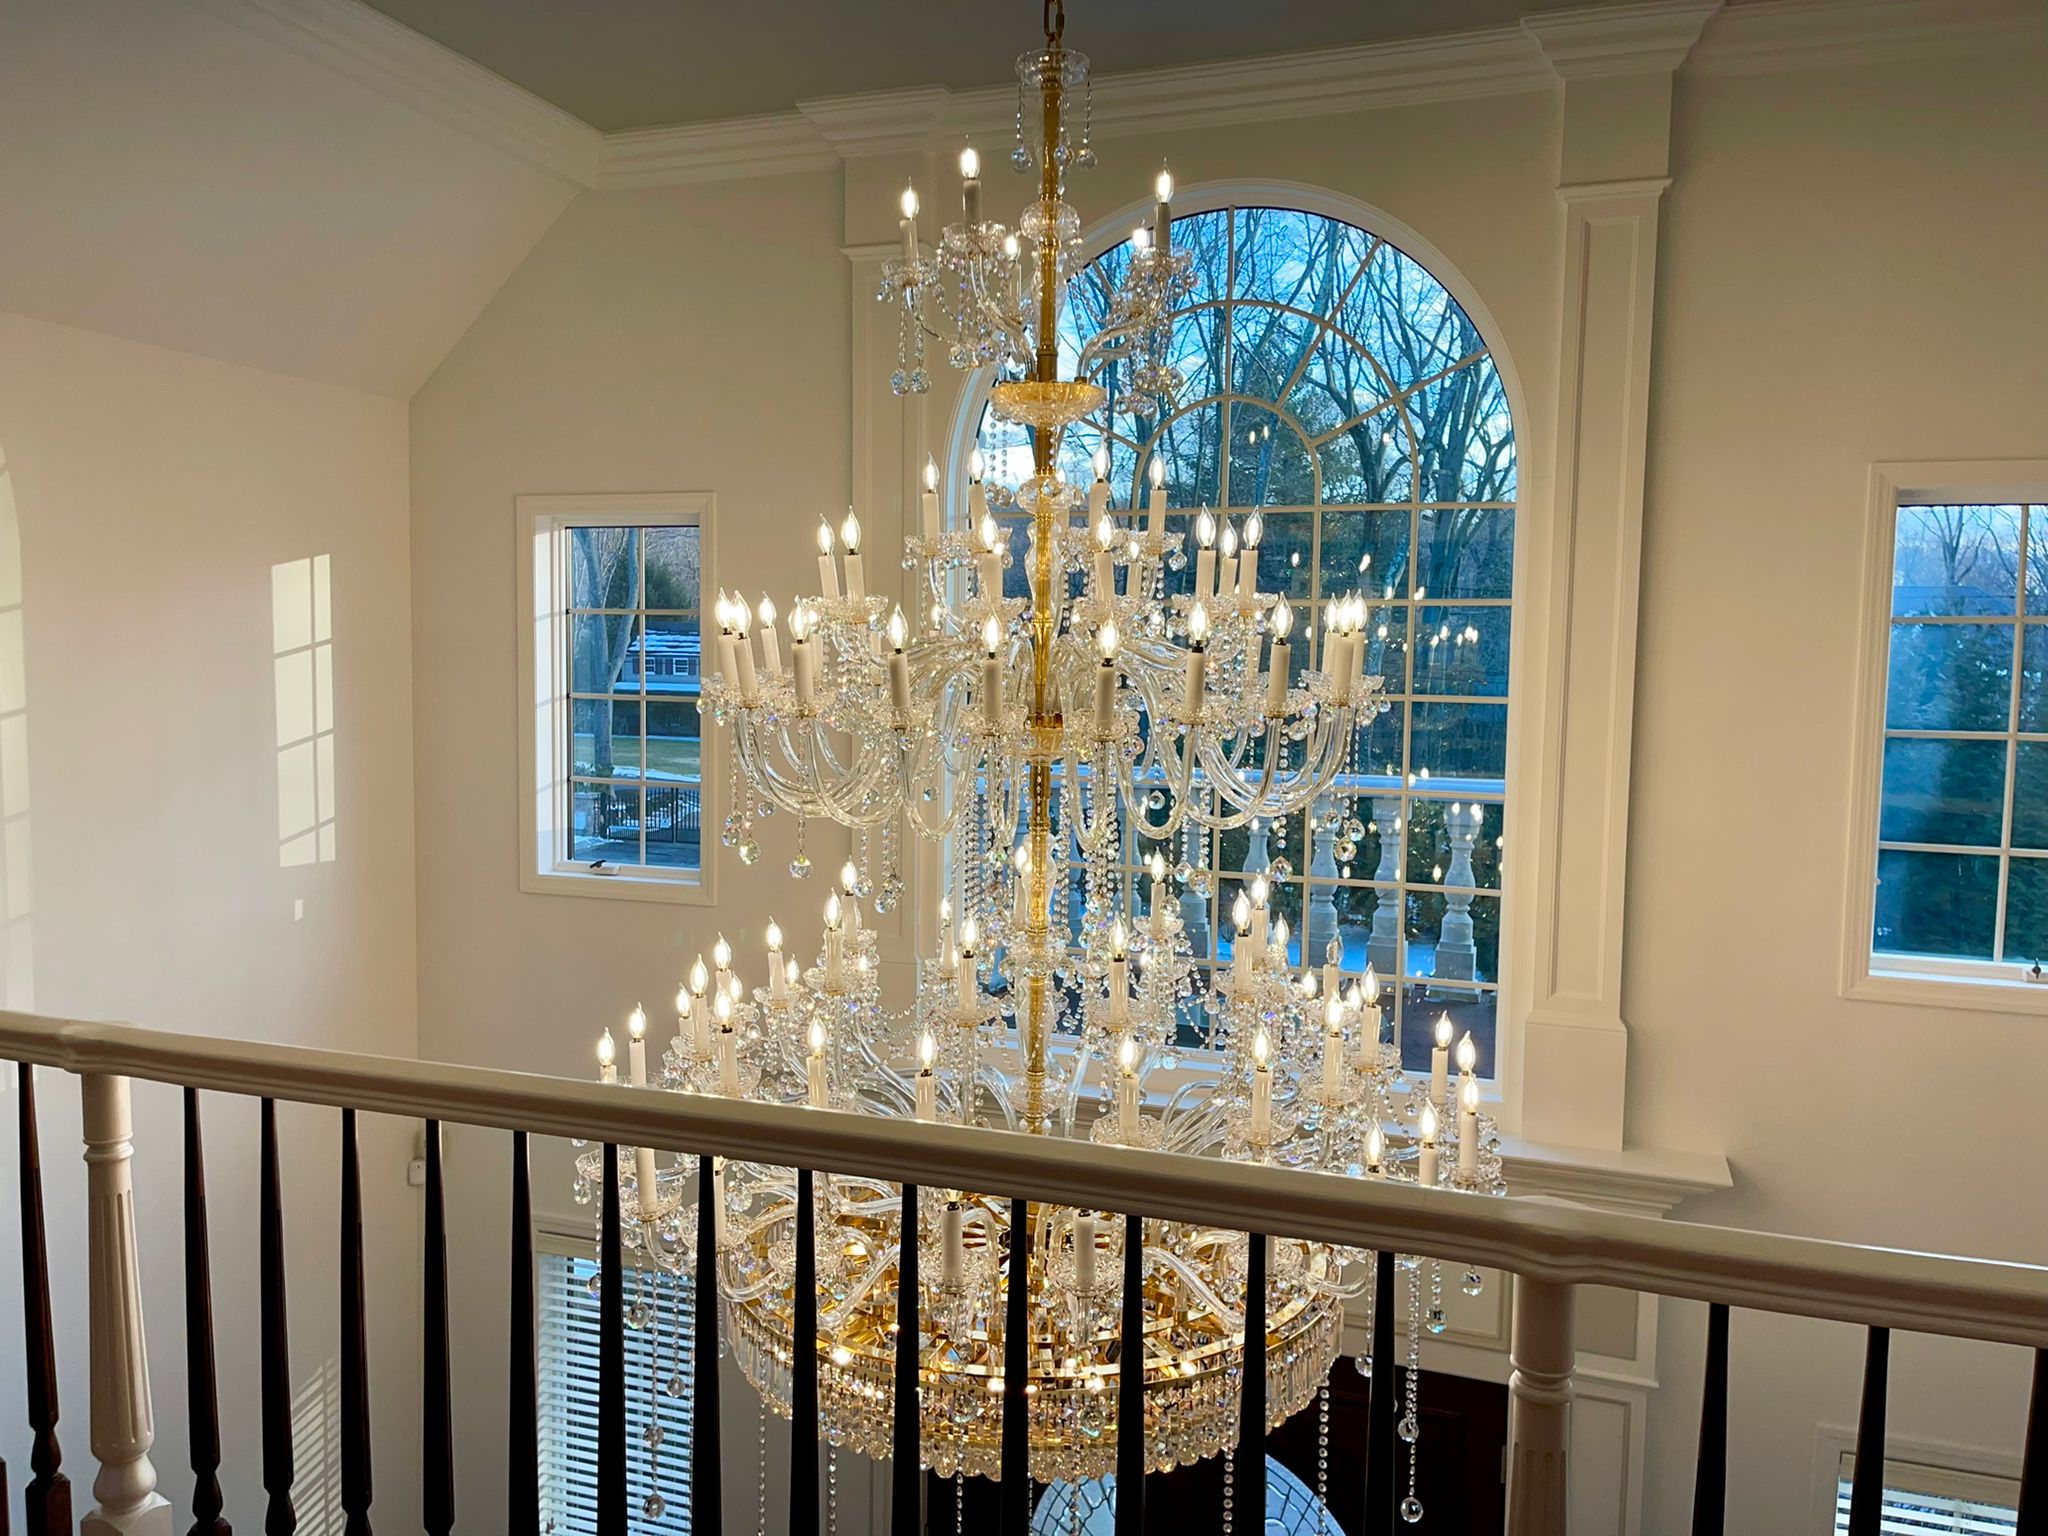 Professional chandelier services